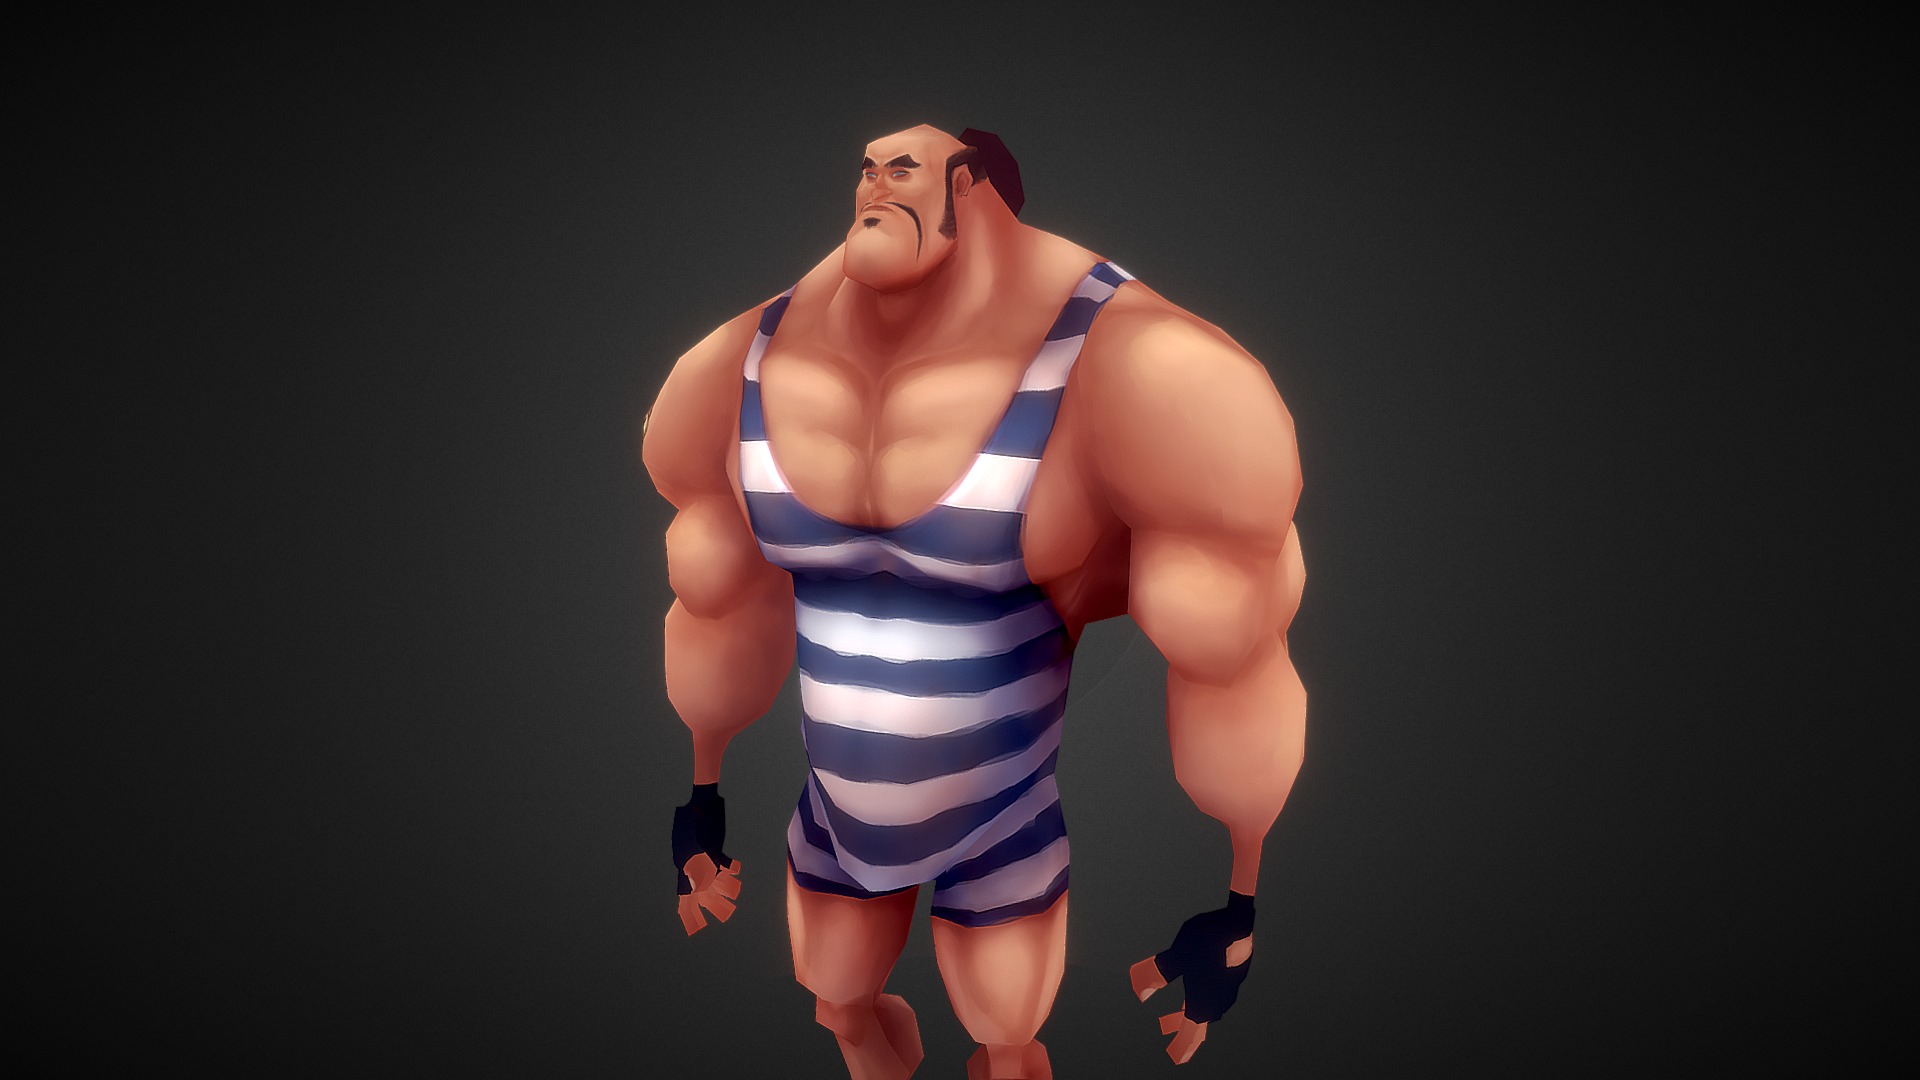 Textured up a model made by JGcount on Polycount.

This was a super fun texturing excercise to work on in my free time :&gt; any feedback/critique would be much appreciated!

Model found here: https://polycount.com/discussion/70908/sdk-master-thread - Strongman (JGcount) - 3D model by Vinnie D'Cruz (@morques) 3d model